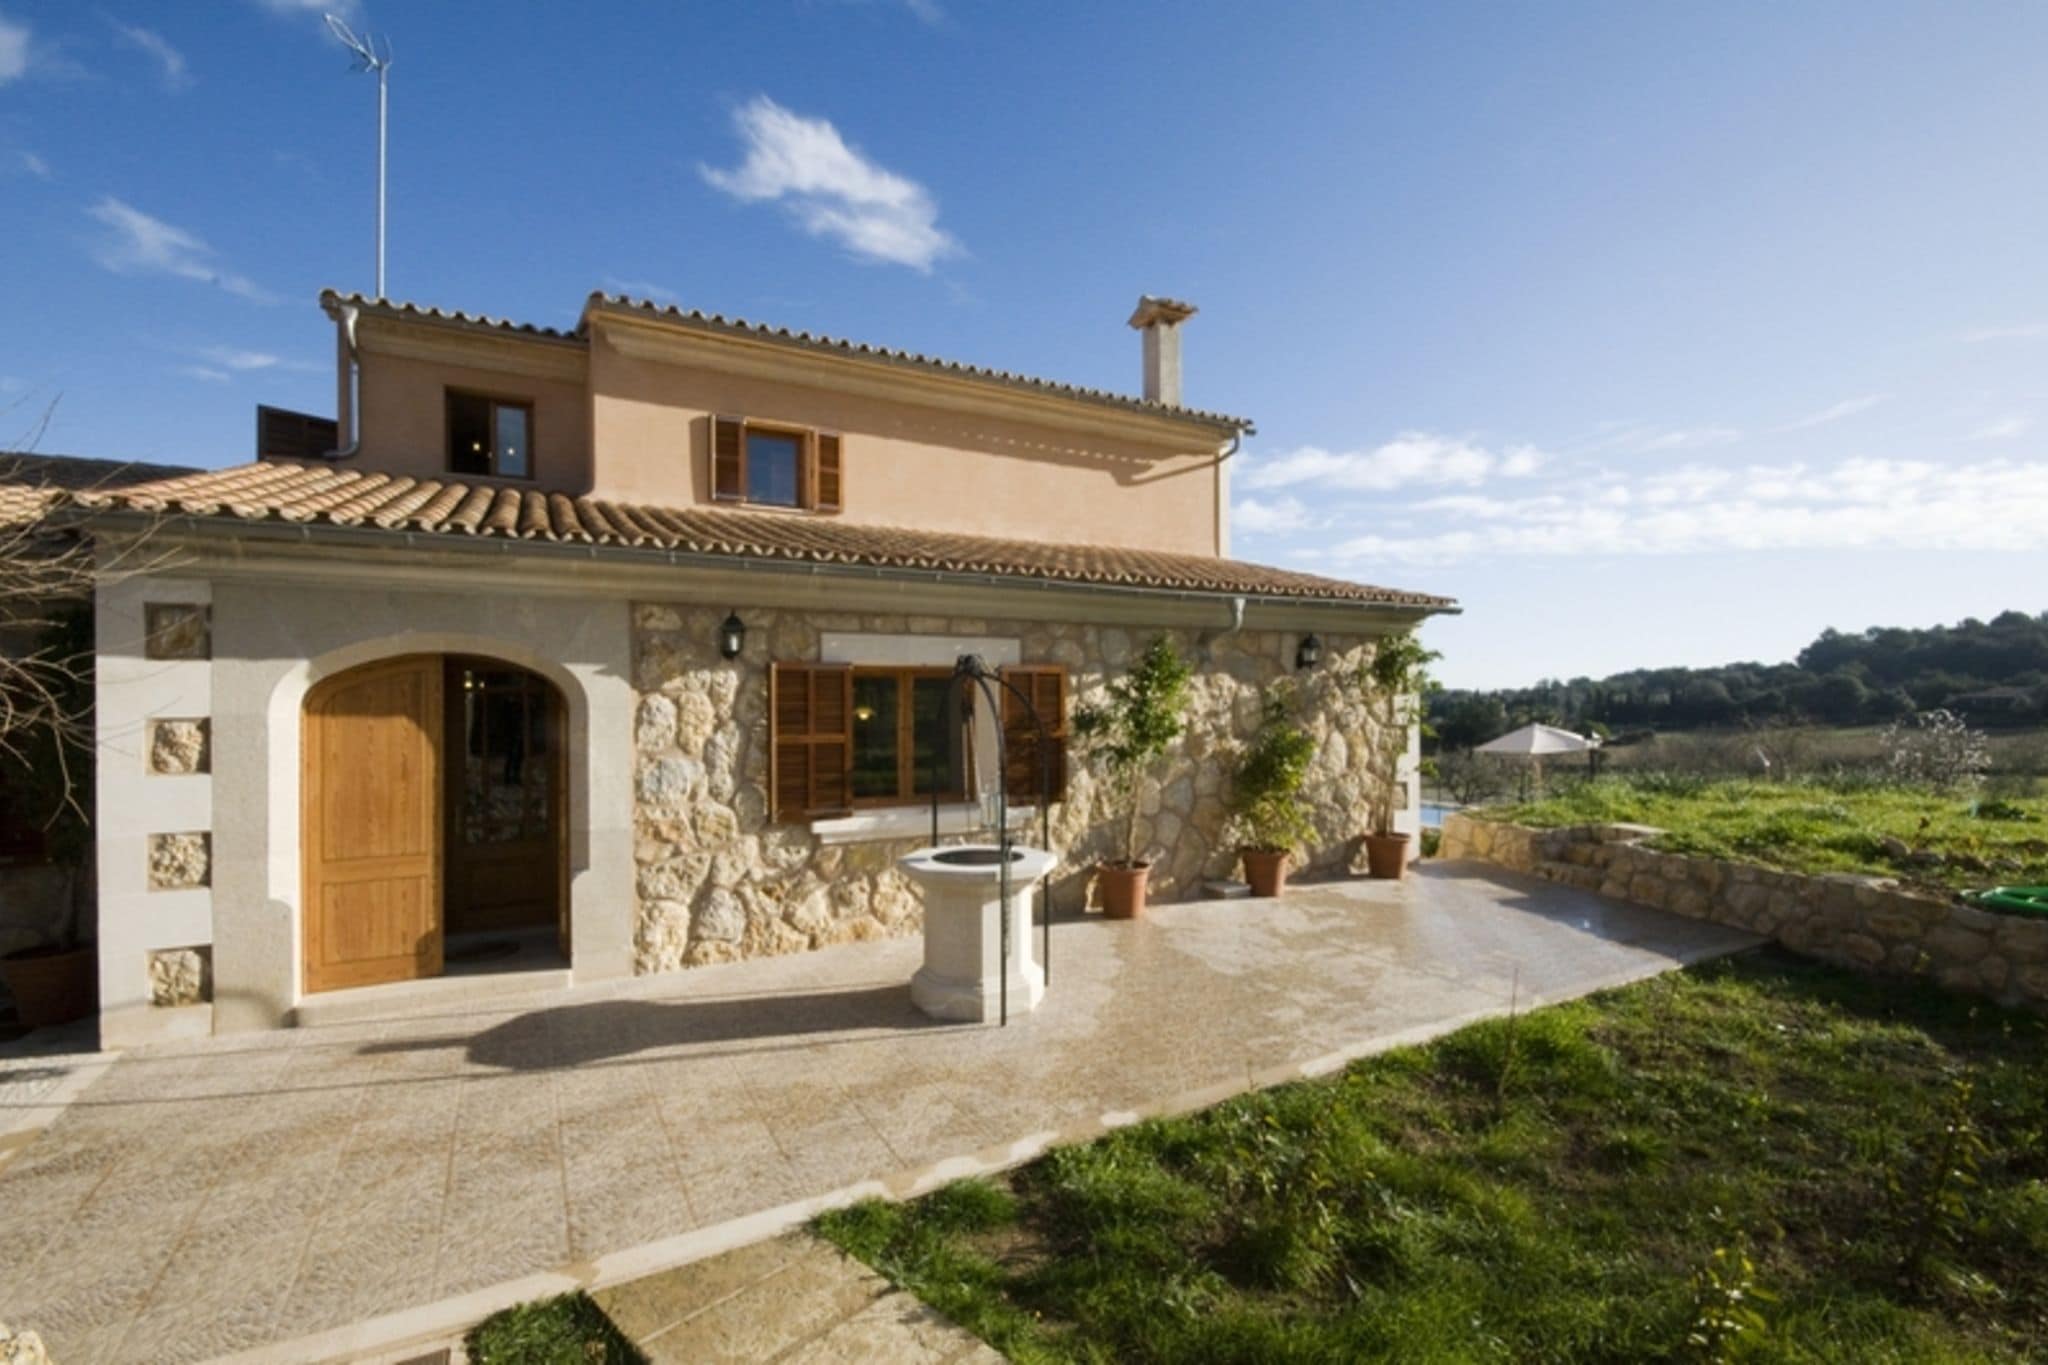 Amazing country house with panoramic views of the Tramuntana mountains